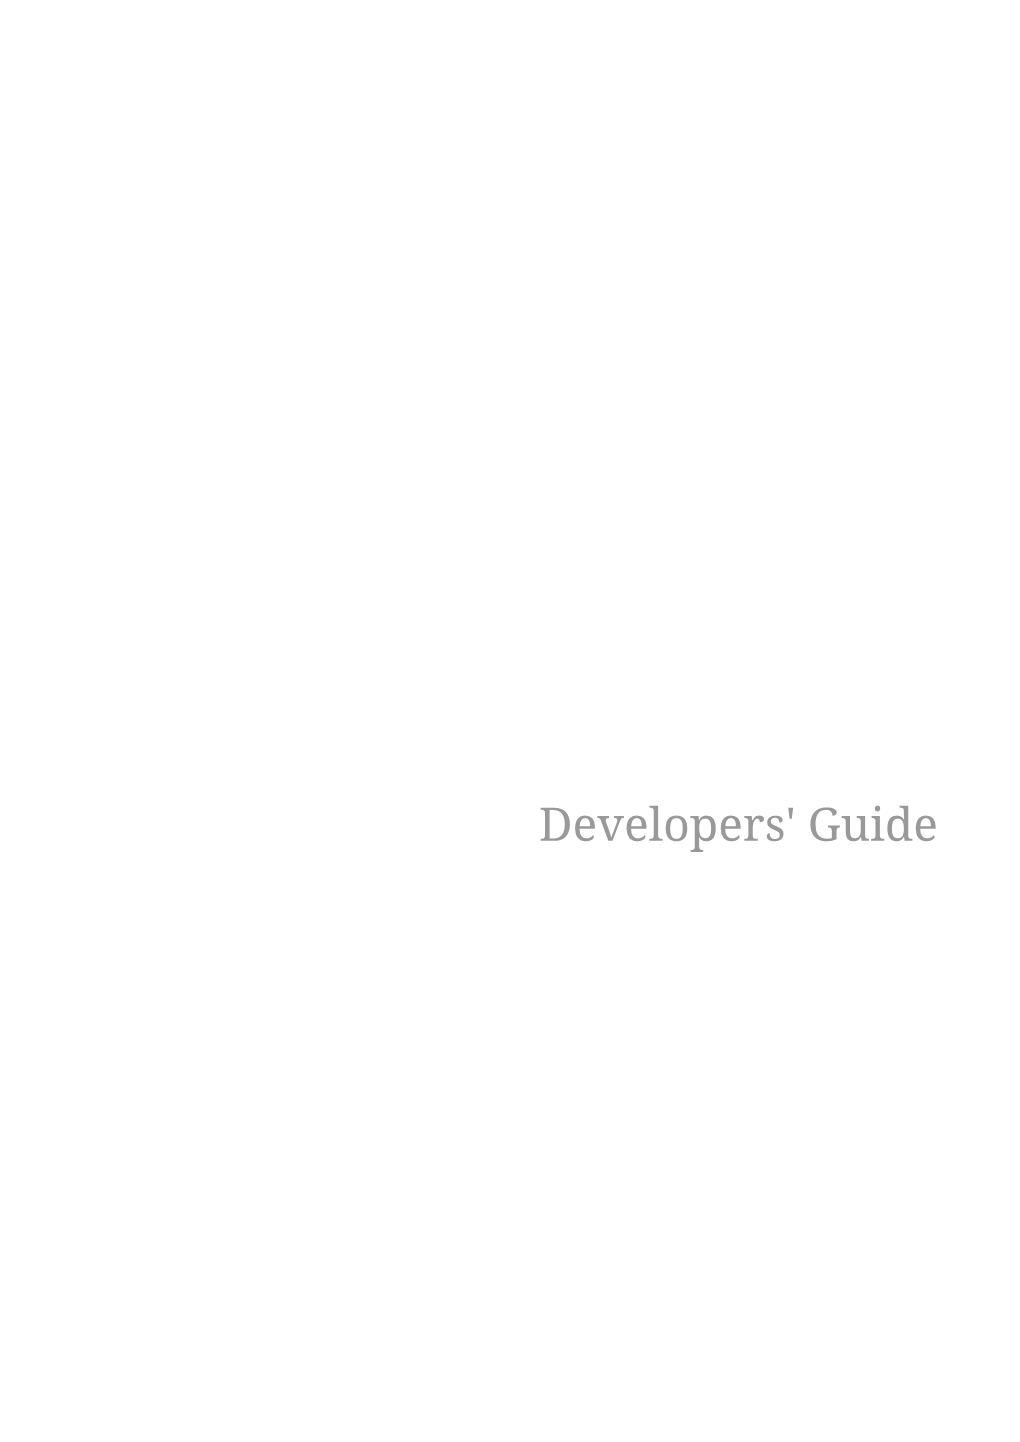 Developers' Guide Table of Contents